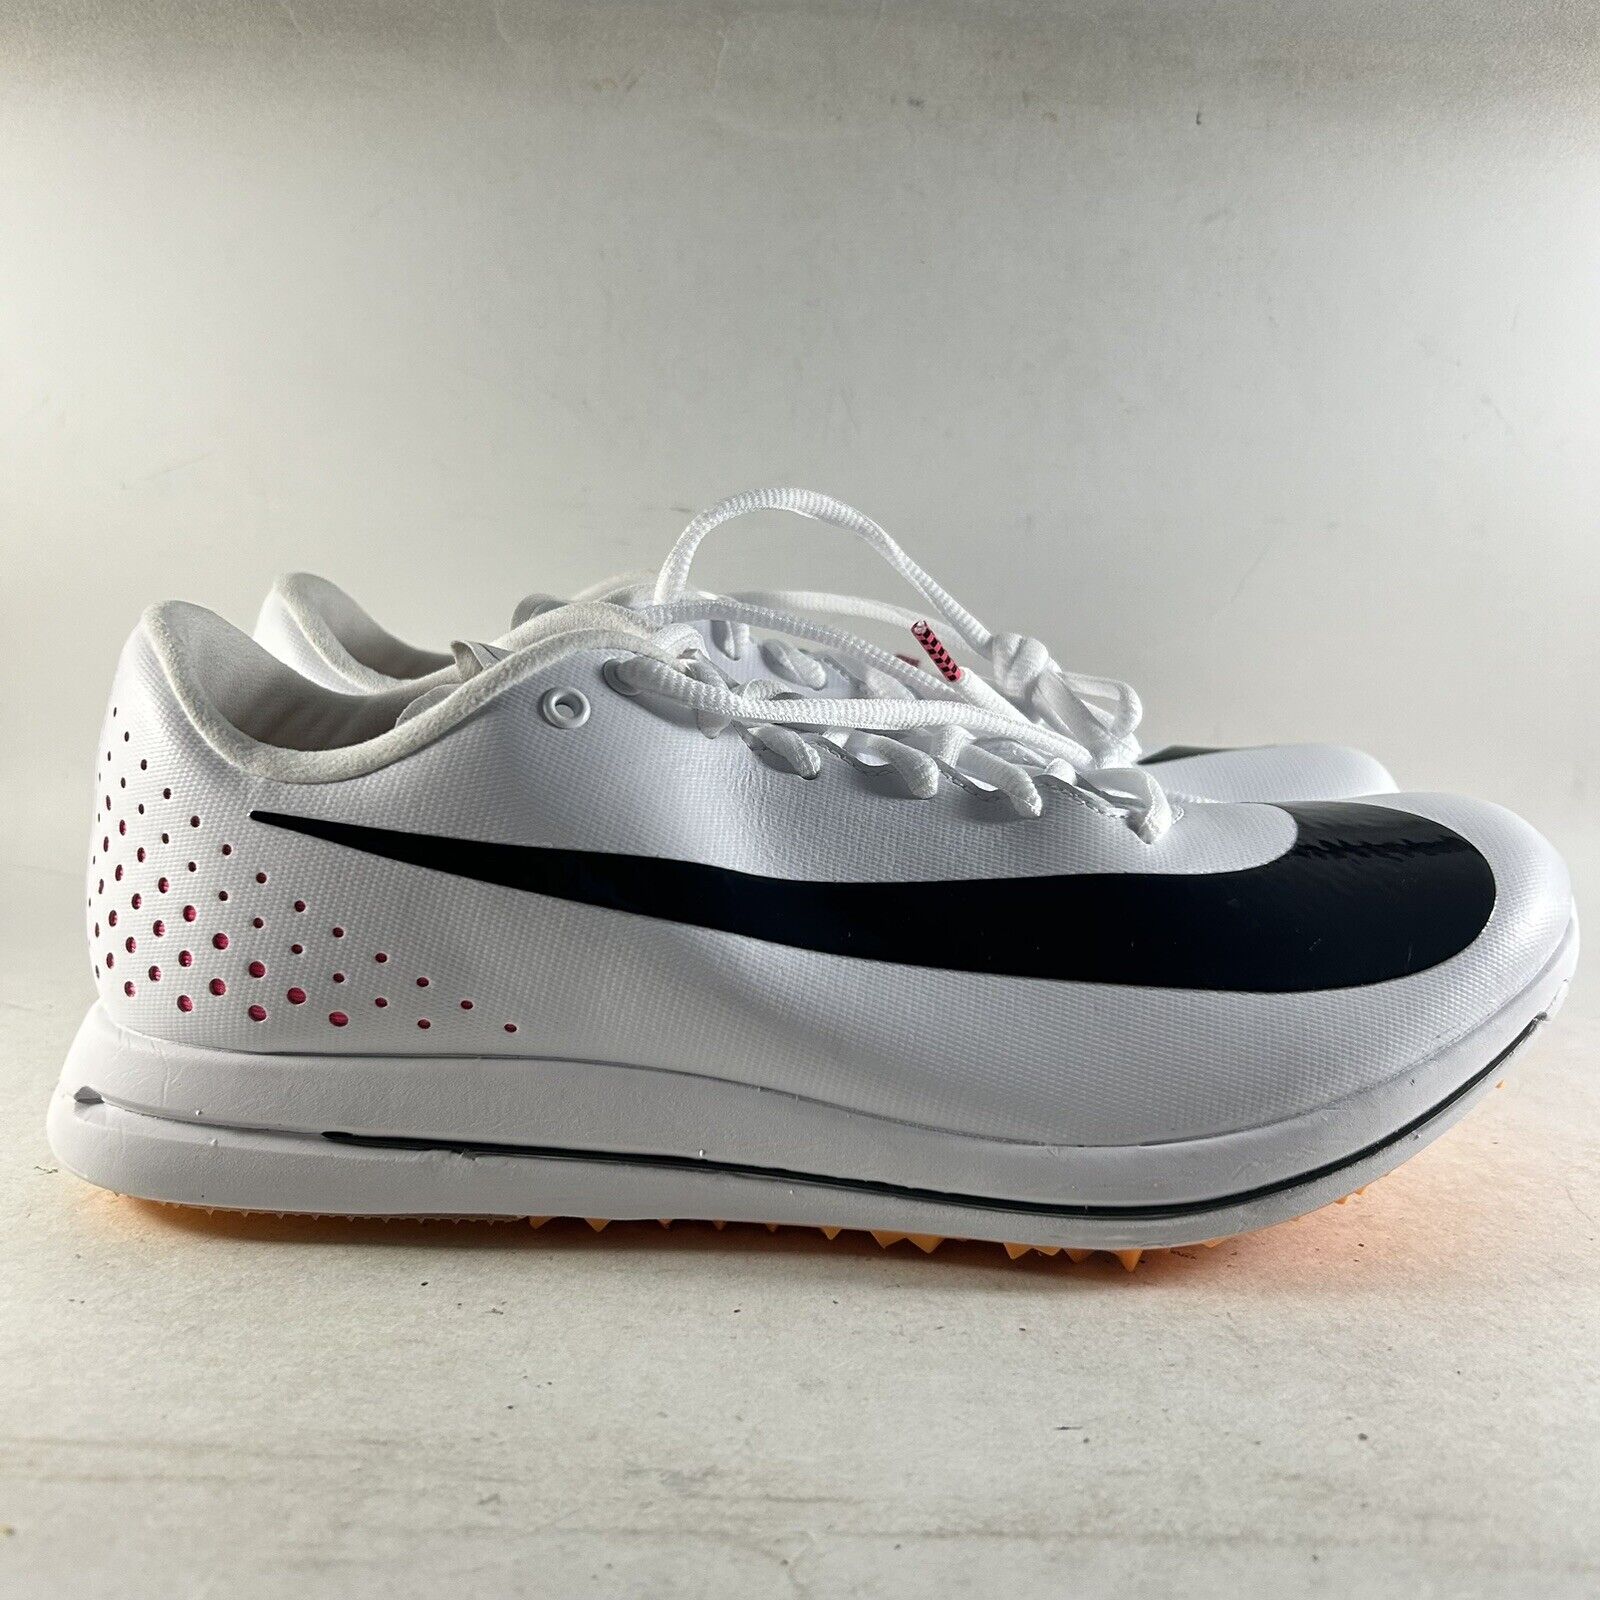 NEW Nike Zoom Triple Jump Elite 2 Track Spikes Shoes White Size 11 AO0808-101